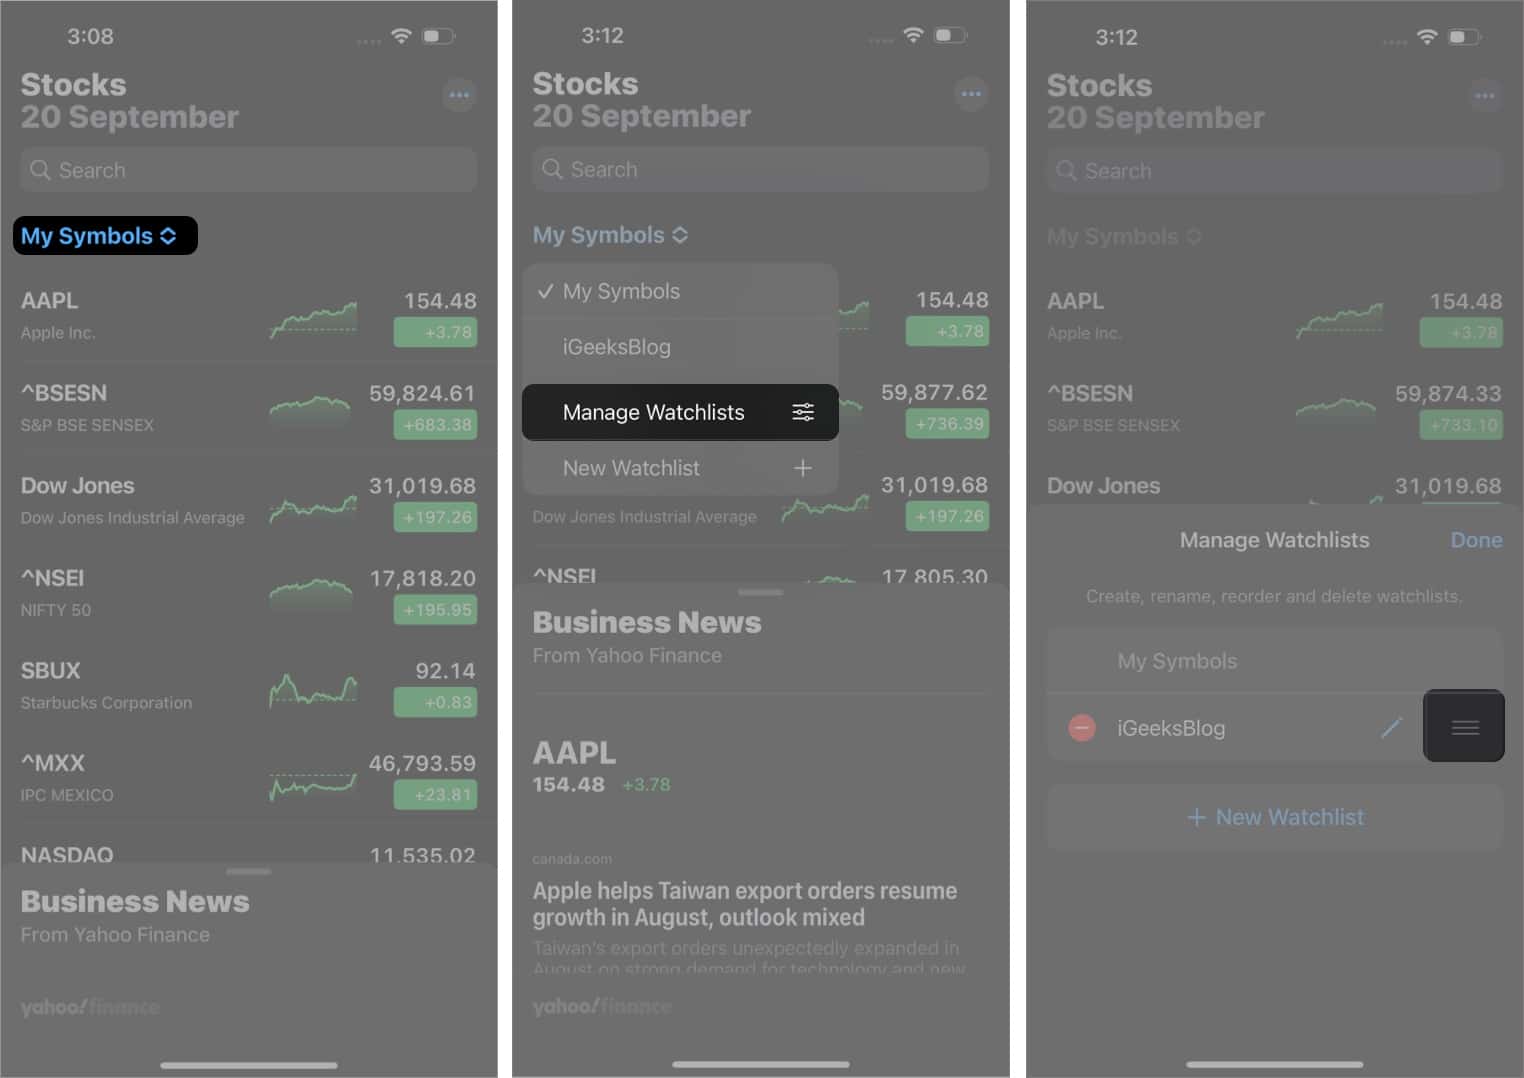 Steps to Reorder Watchlist in Stocks app on an iPhone